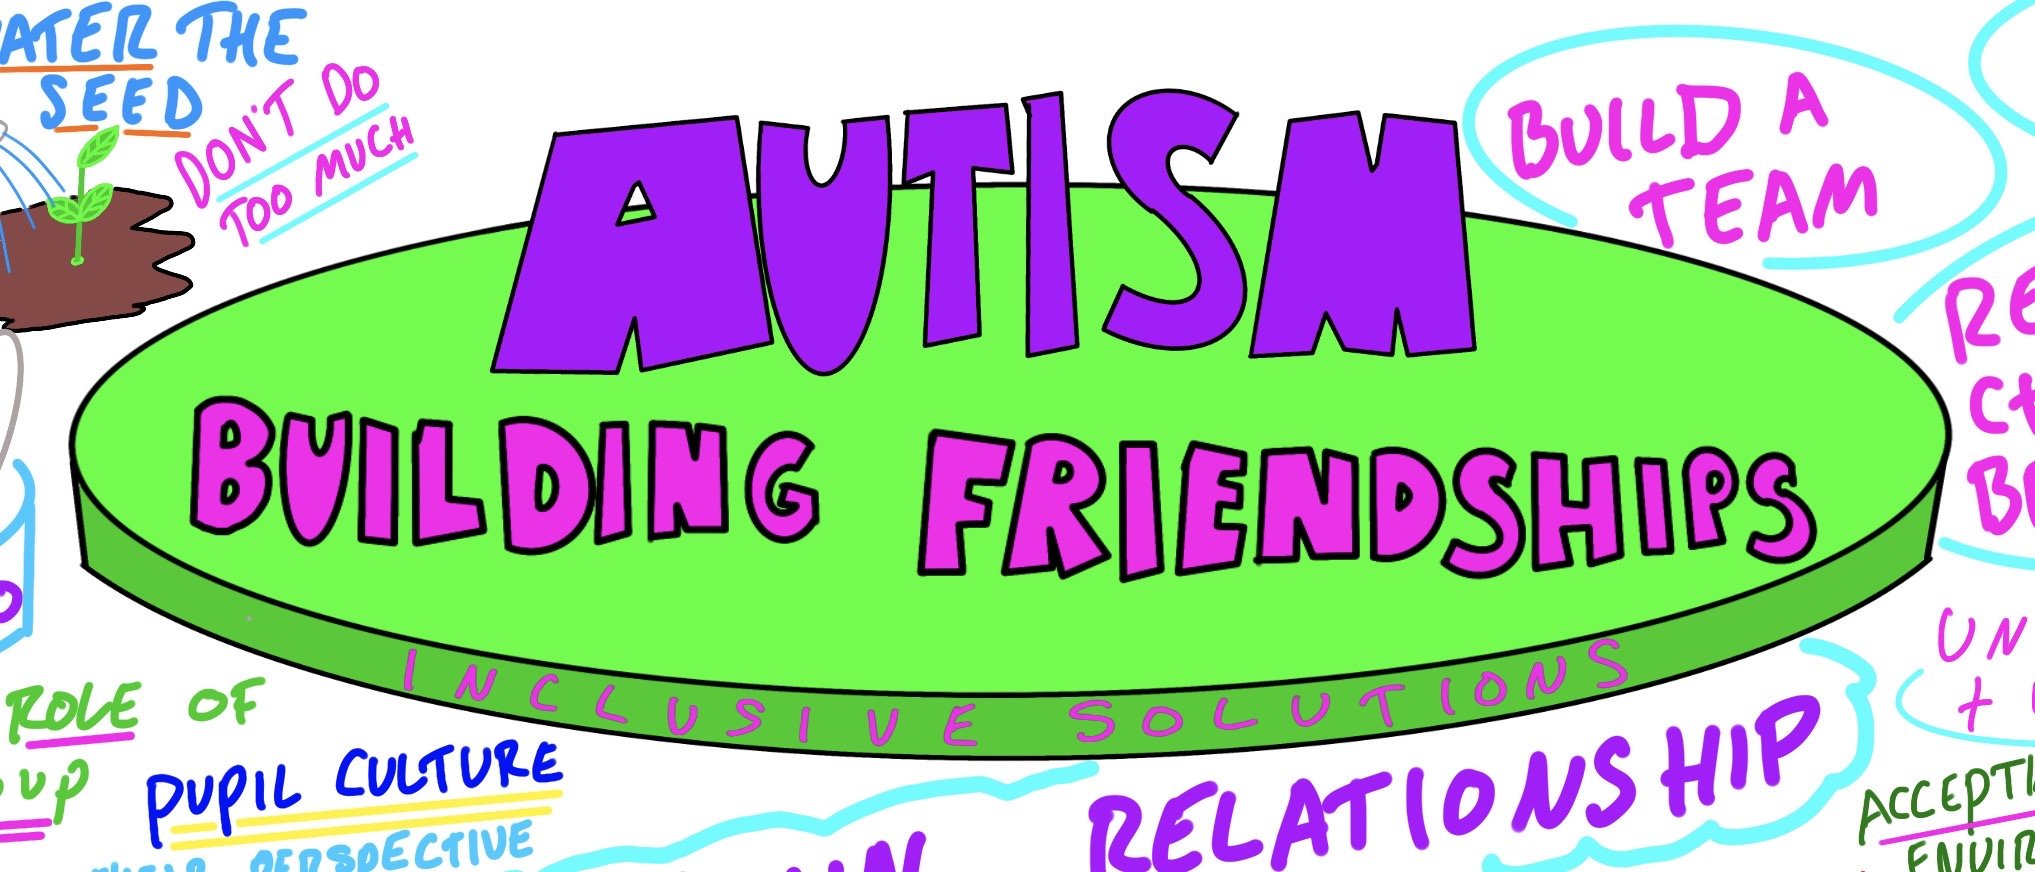 Building friendships with neurotypical children